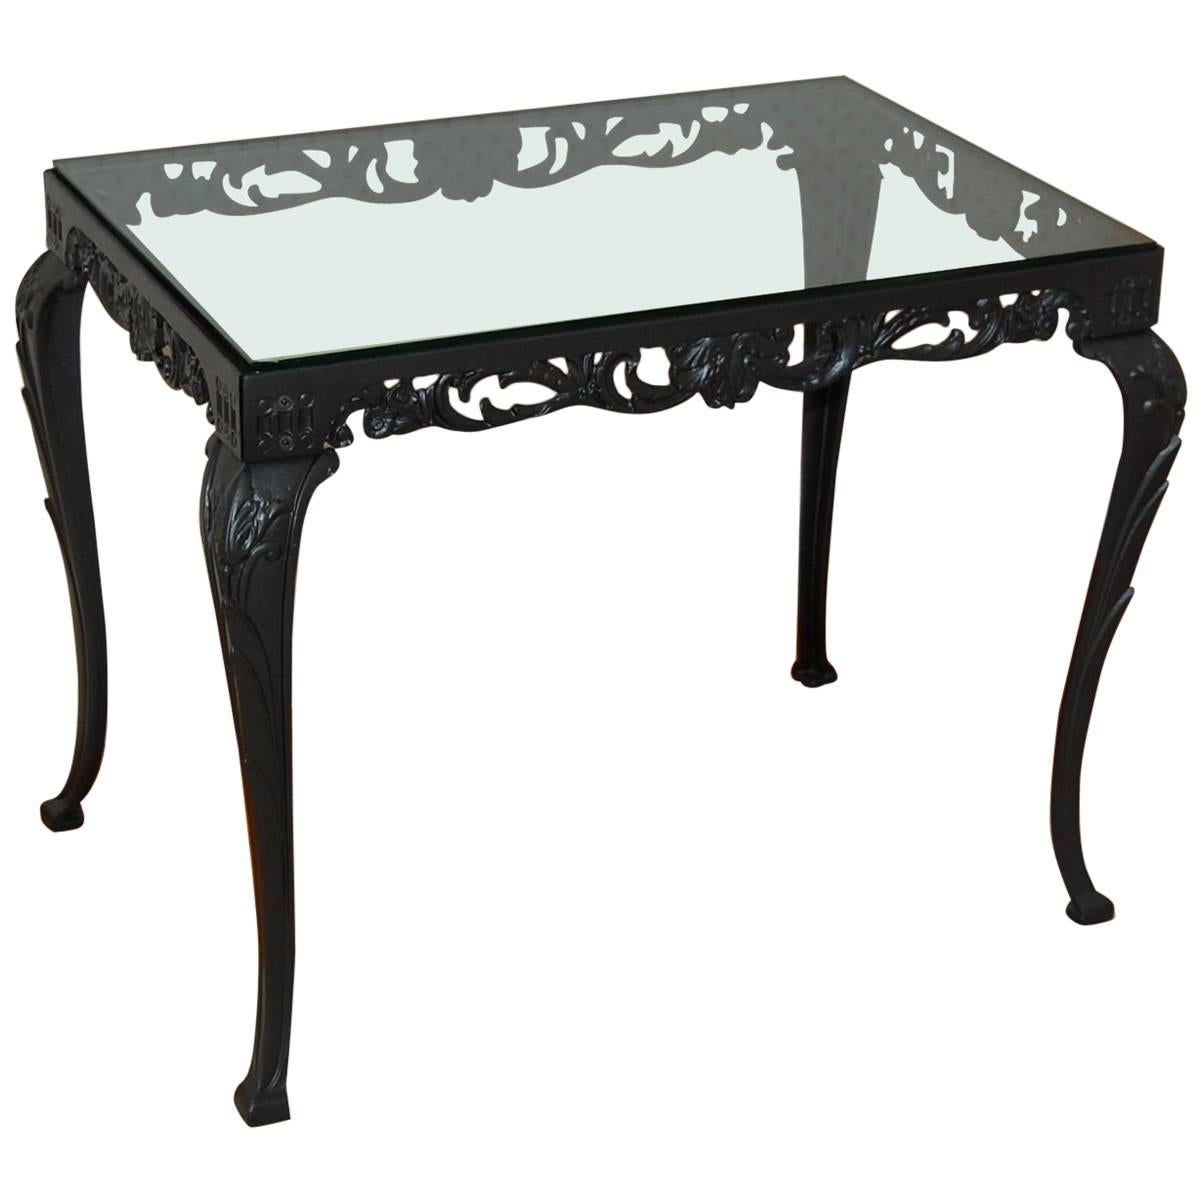 Fancy Cast Iron Rectangular Table Base with Glass Top, circa 1930s For Sale